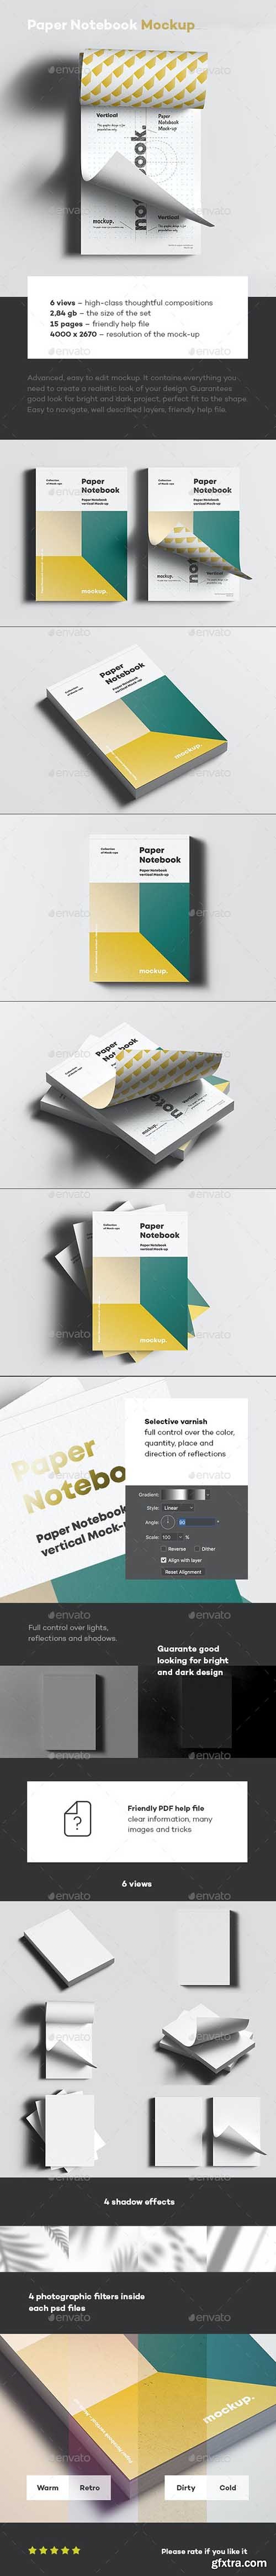 GraphicRiver - Paper Notebook Mock-up 35177314